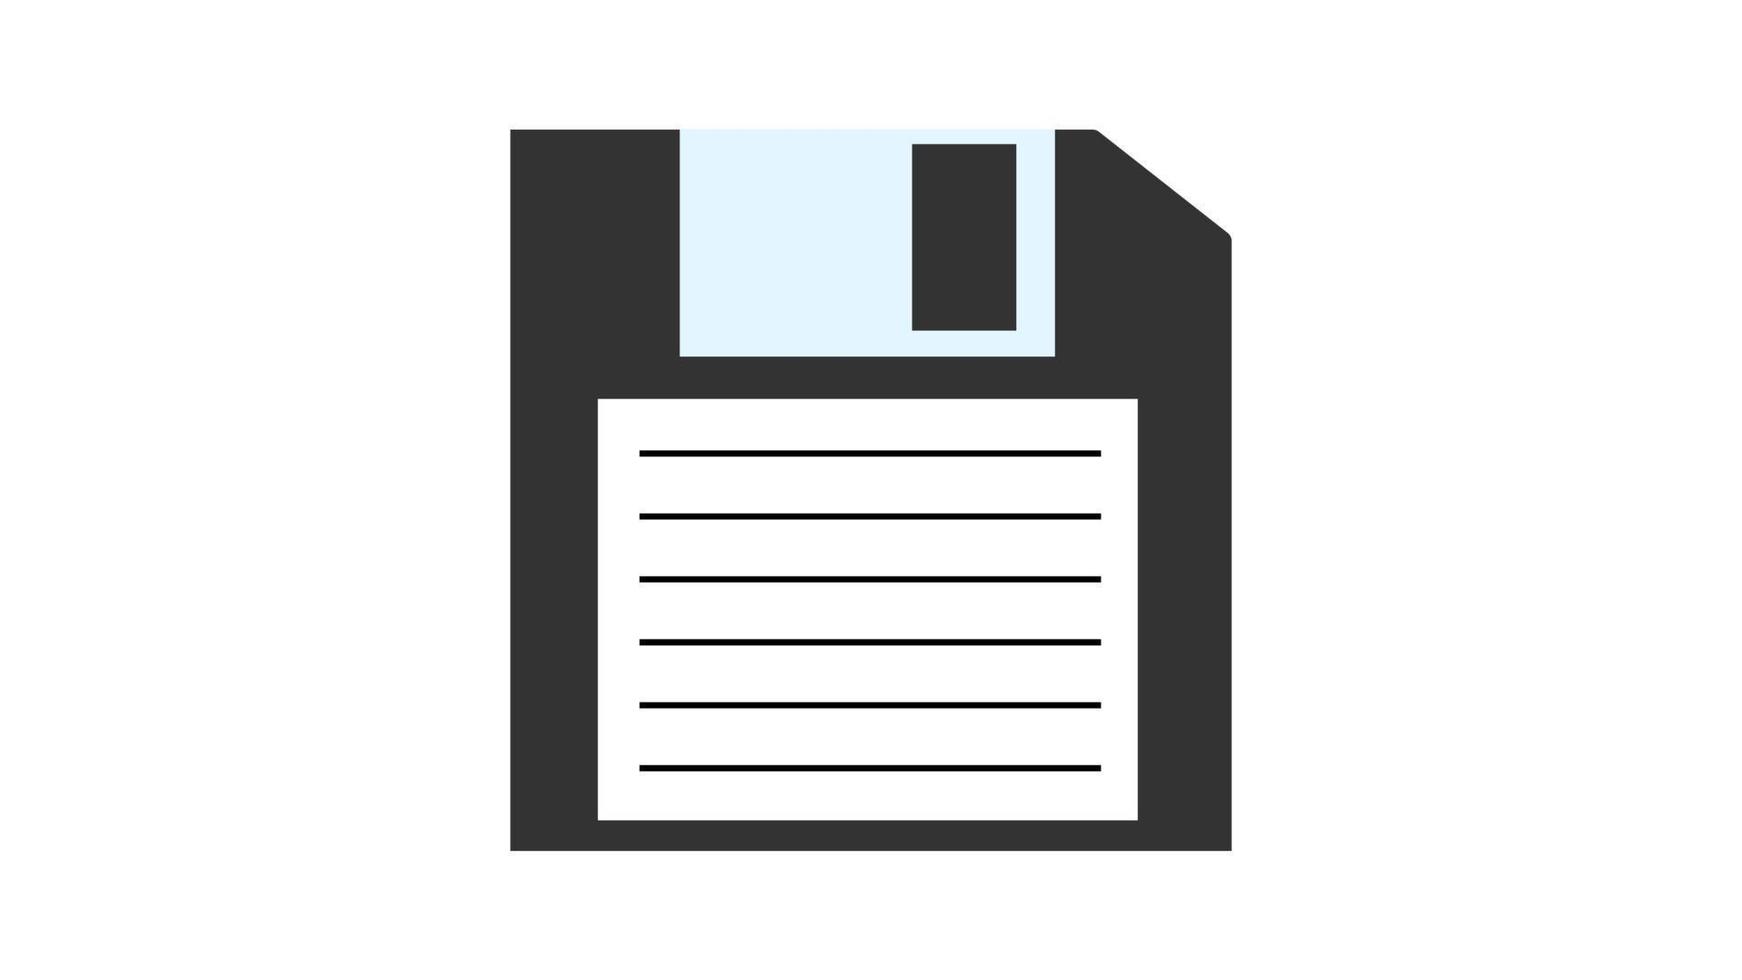 Old retro vintage hipster floppy disk for computer to store information, pc from 70s, 80s, 90s. Black and white icon. Vector illustration